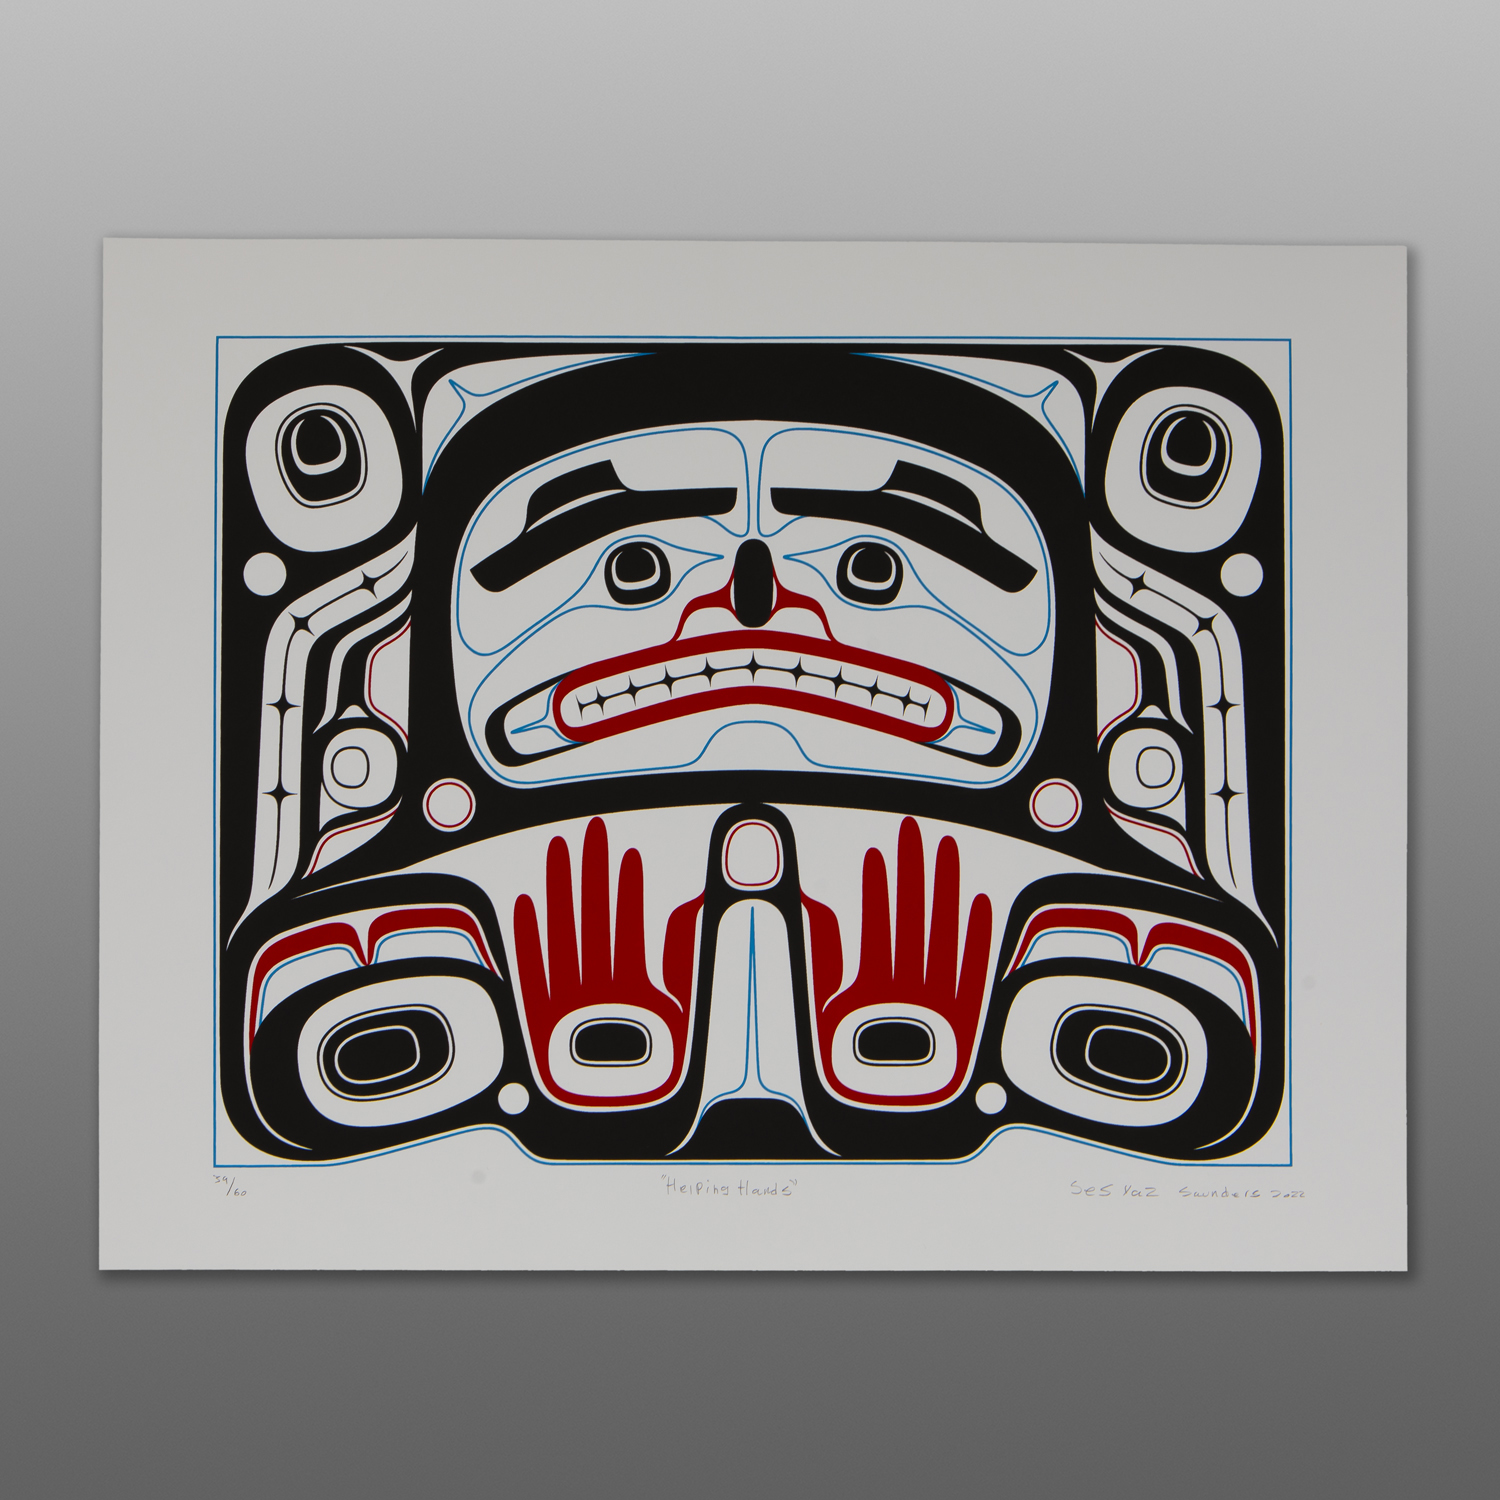 Helping Hands
Sesyaz Saunders
Nuxalk
Serigraph
19" x 15"
$325